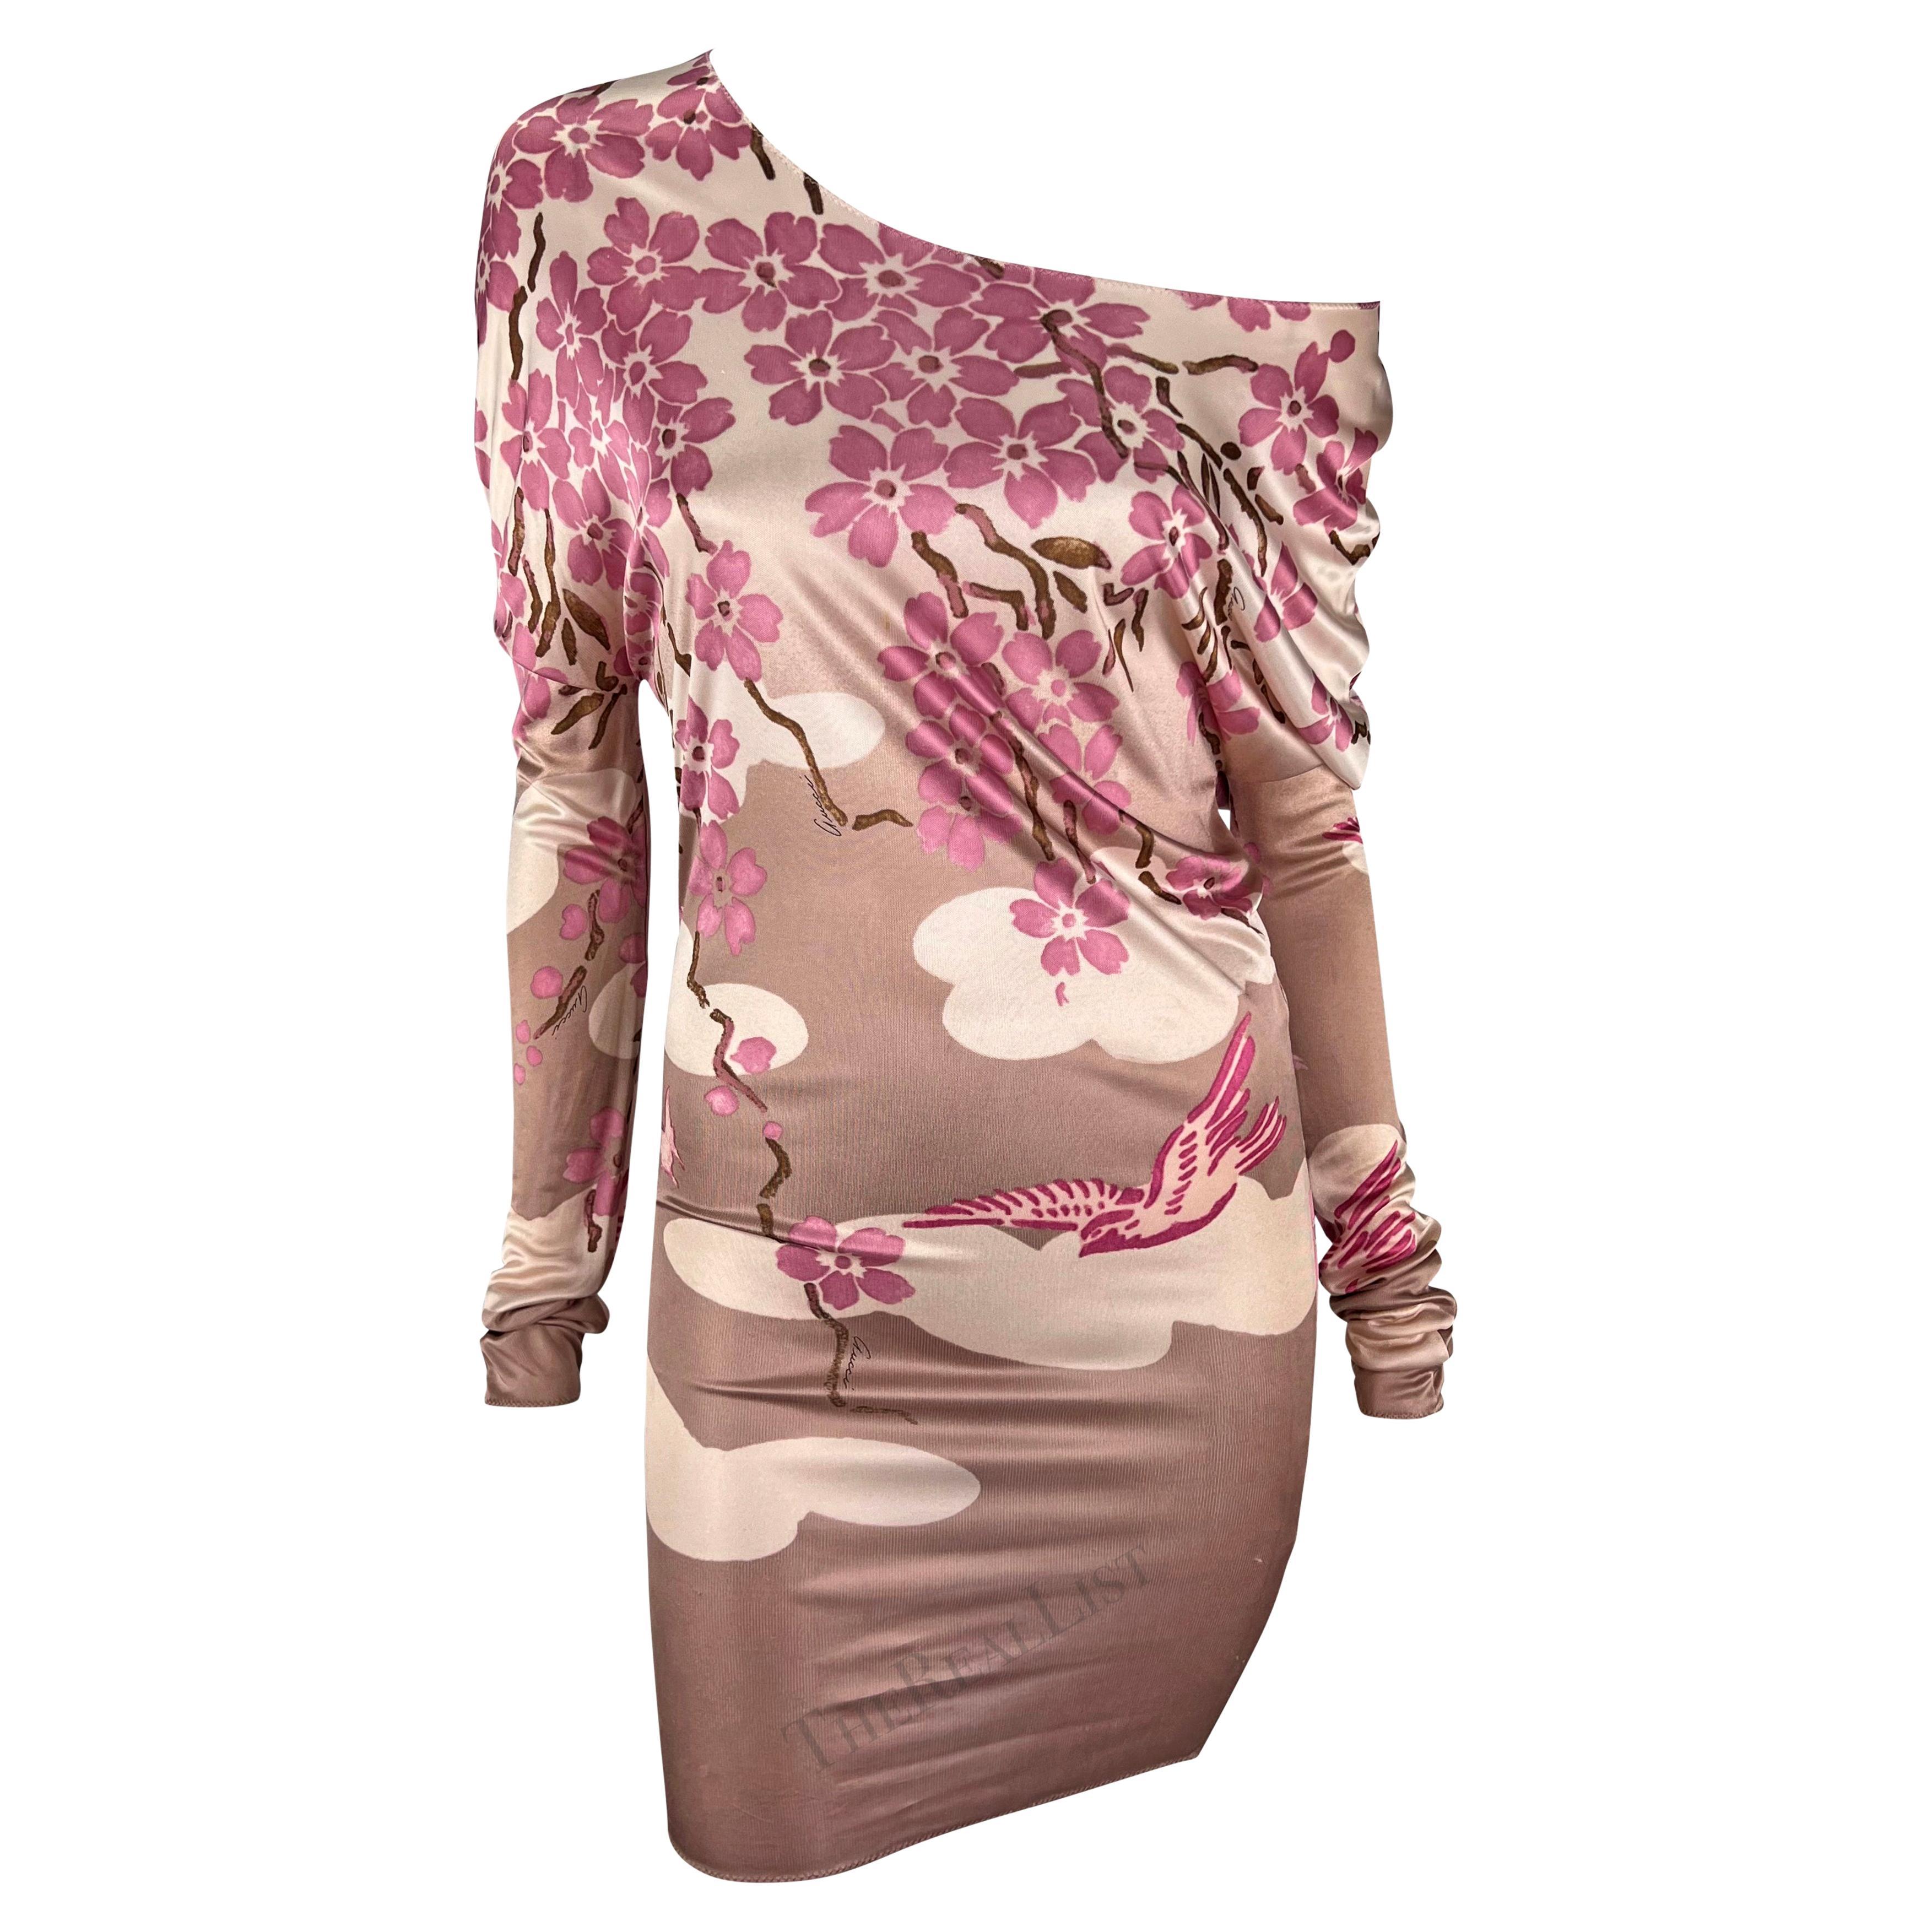 S/S 2003 Gucci by Tom Ford Pink Cherry Blossom Runway Mini Dress  For Sale